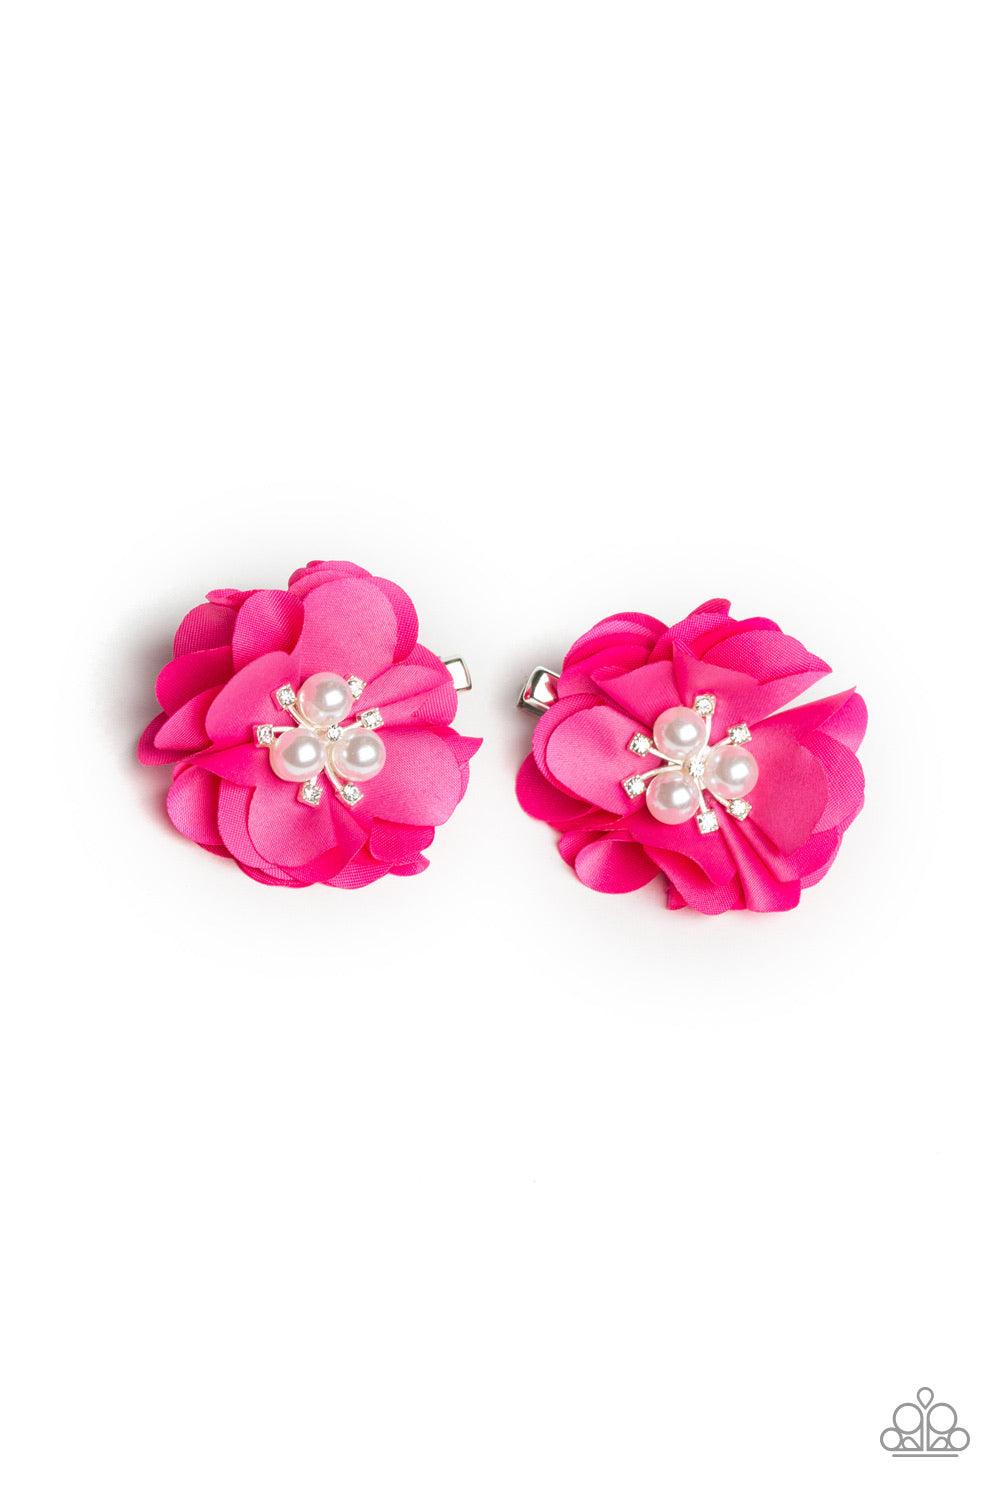 Paparazzi Accessories Diamond Dew - Pink Soft pink chiffon petals gather around two white rhinestone and pearl dotted centers, creating a refined pair of blossoms. Each flower features a standard hair clip on the back. Hair Accessories